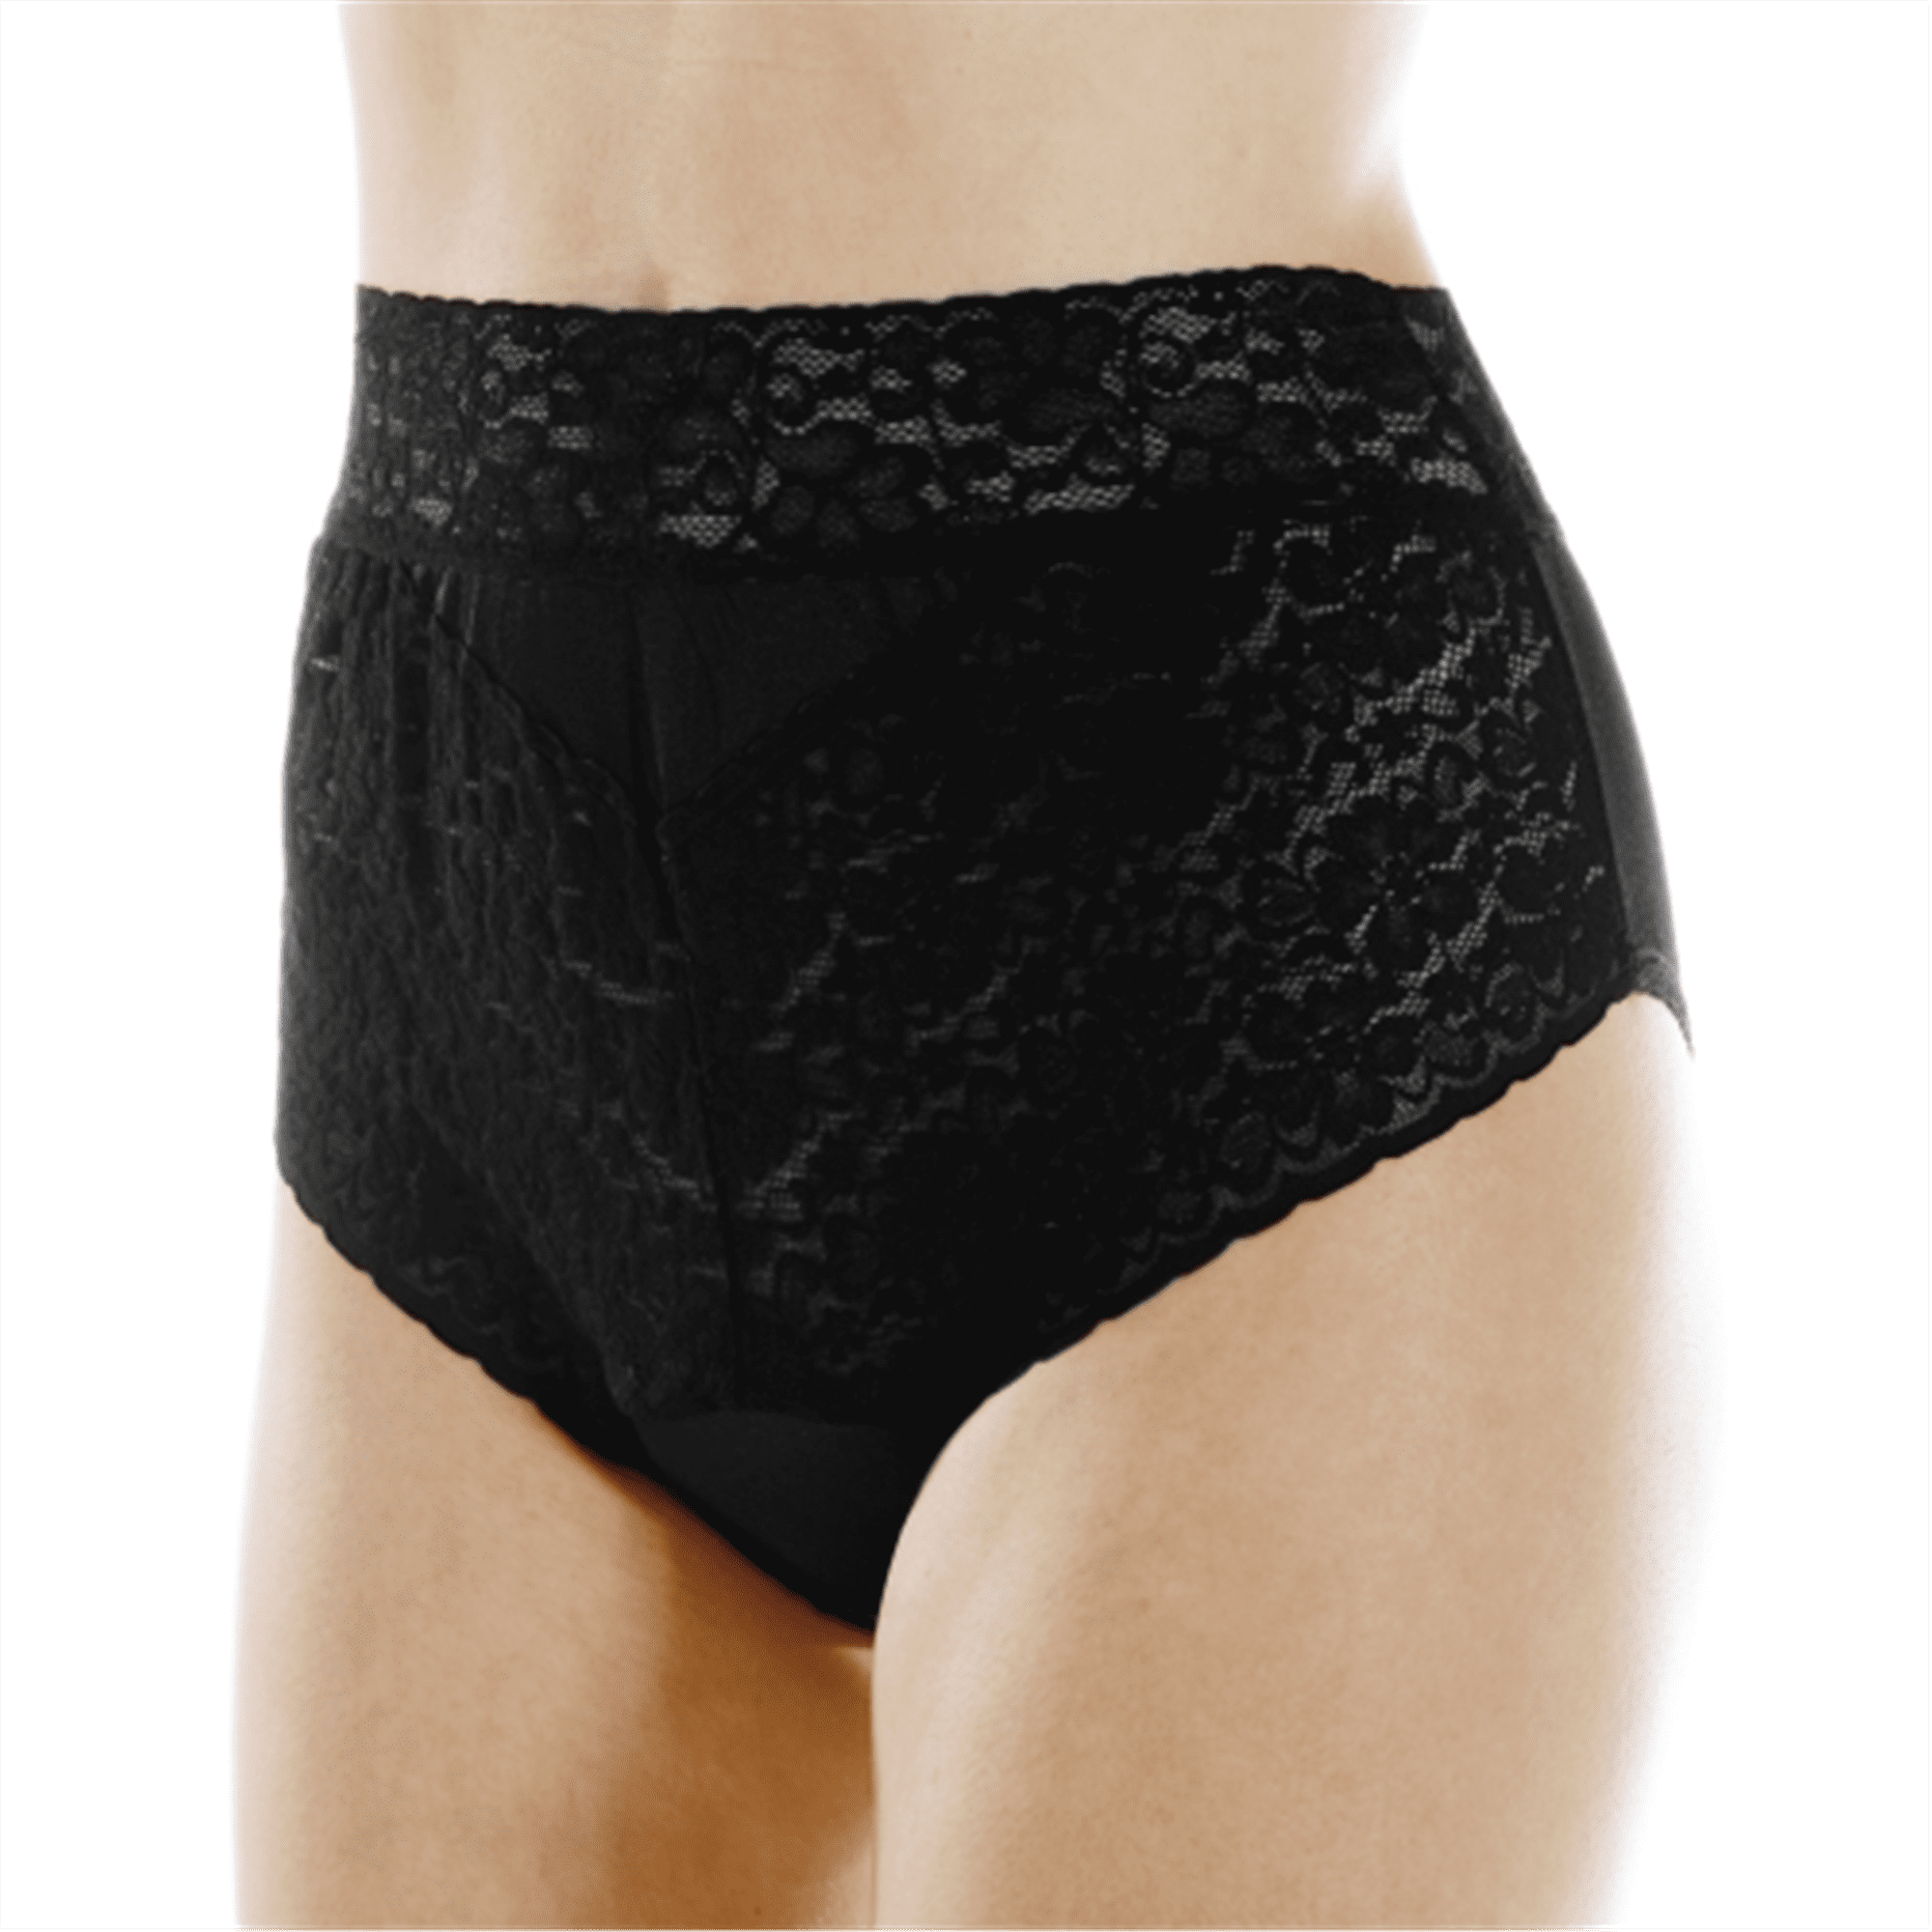 3-Pack Women's Nylon Regular Absorbency Incontinence Panties Beige Large  (Fits Hip 41-42) 